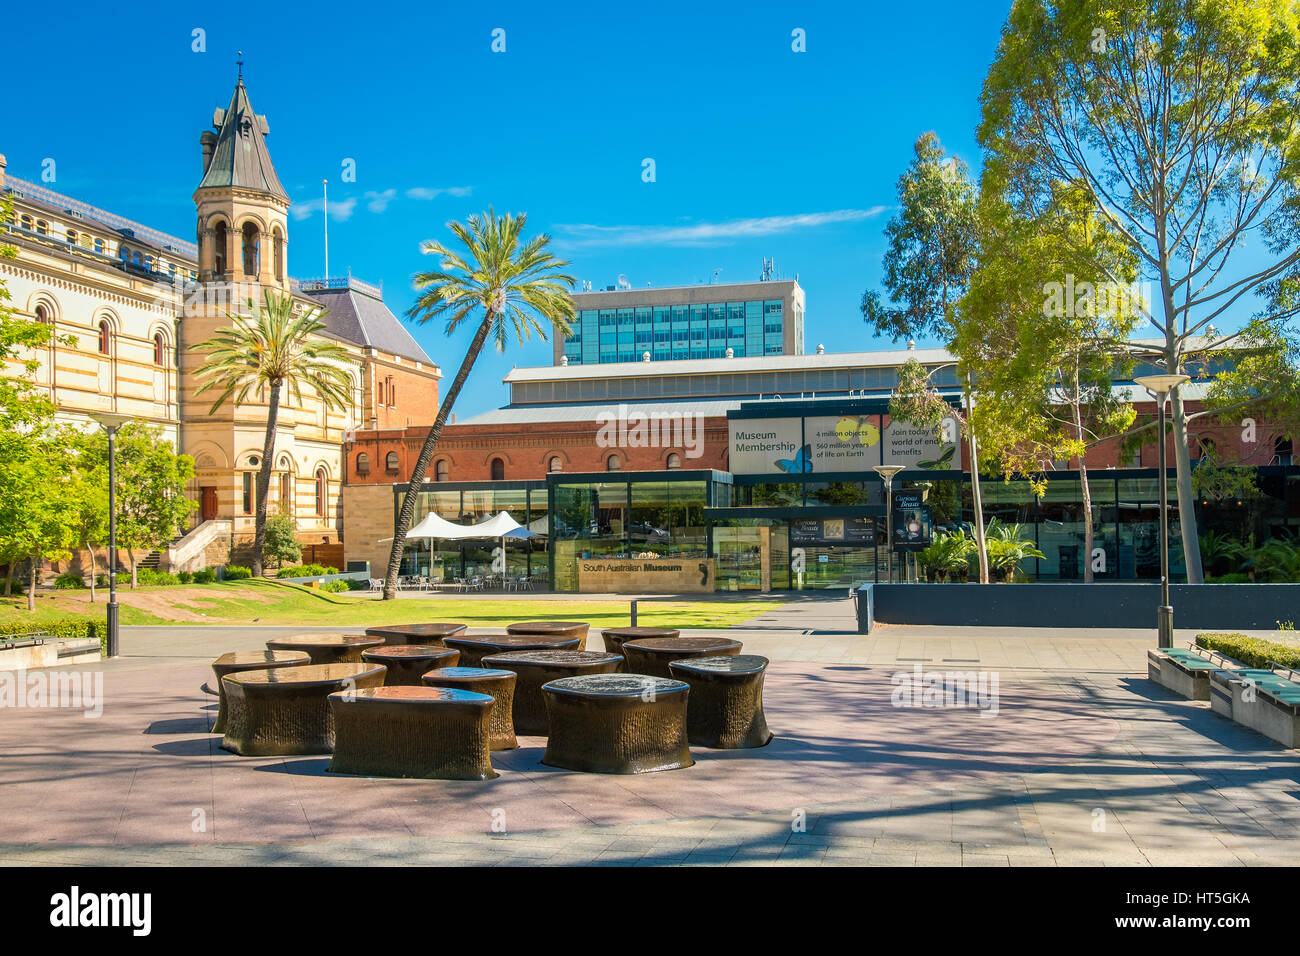 Adelaide, Australia - November 11, 2016:  South Australian Museum located on North Terrace in Adelaide CBD on a day Stock Photo